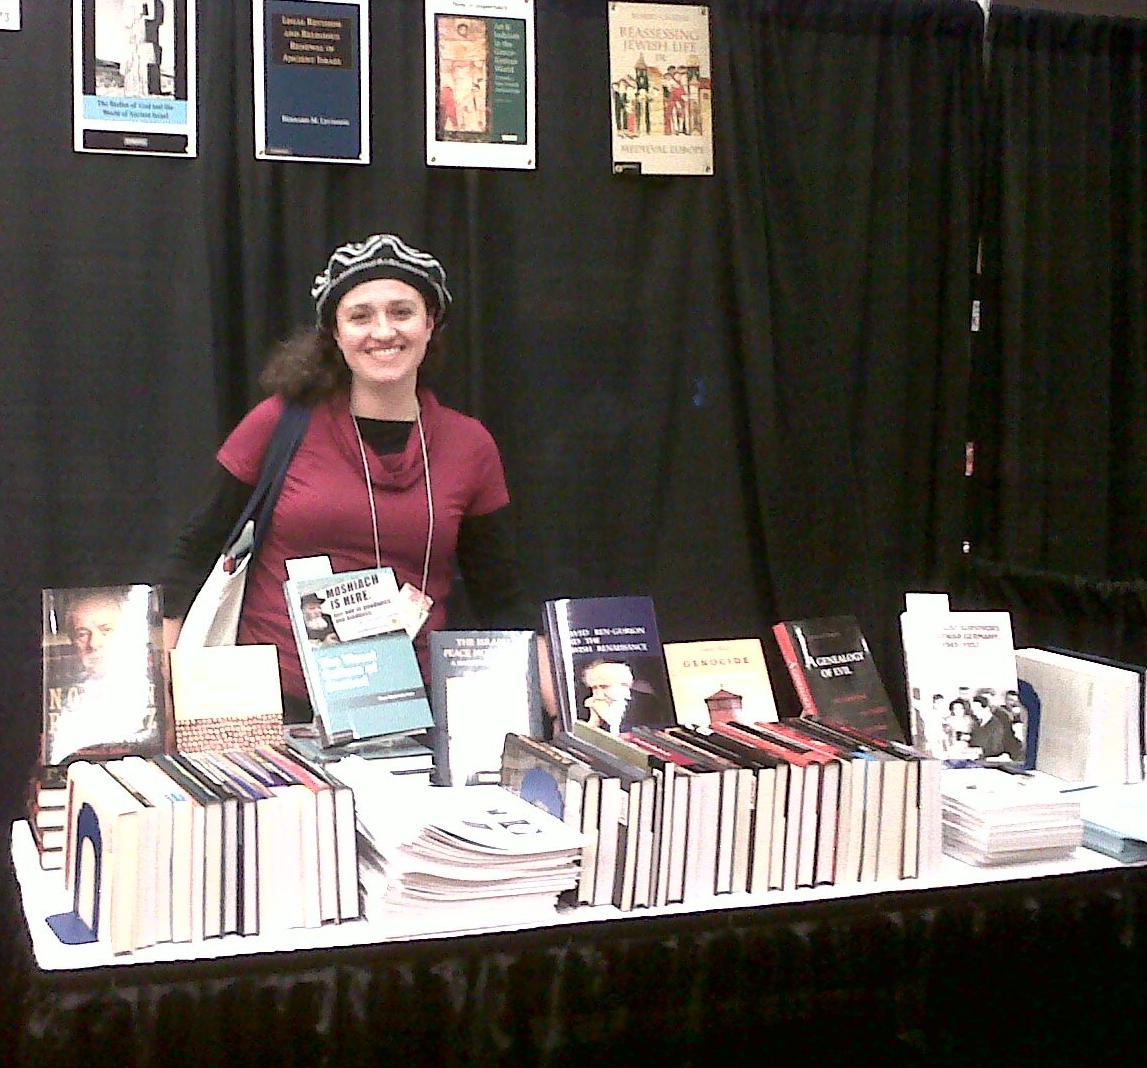 Professor Katz at the Cambridge University Press display with her first book at the Association for Jewish Studies conference.